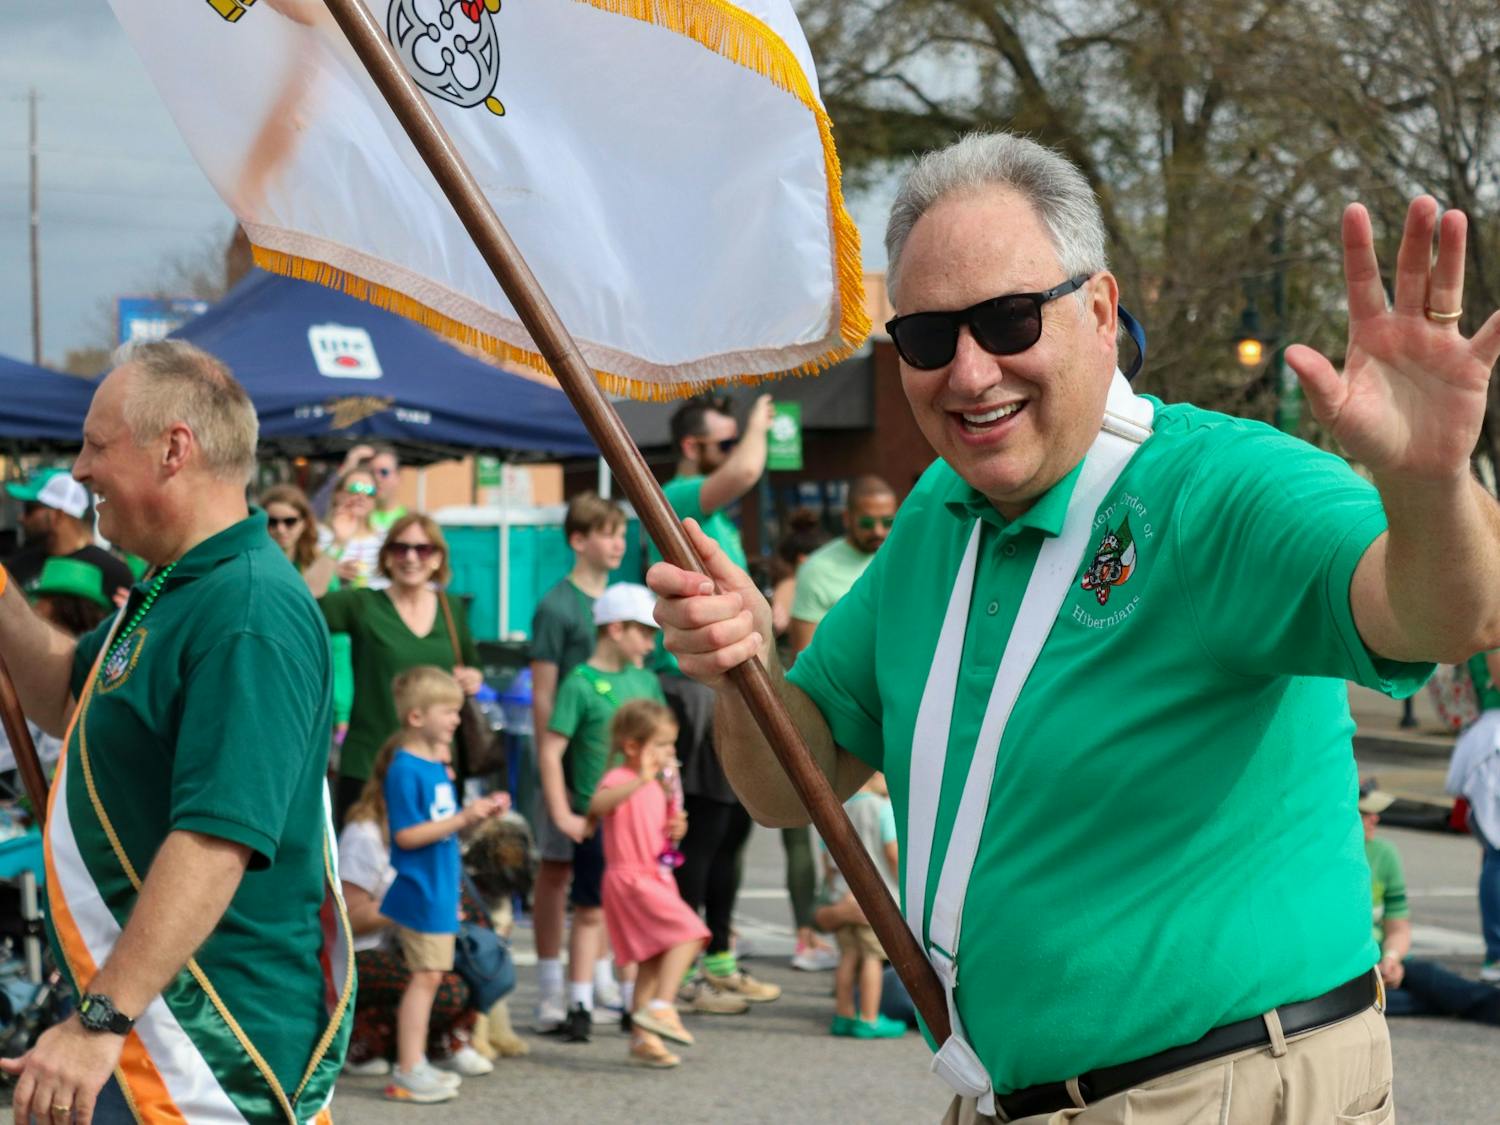 A member of The Ancient Order of Hibernians, an Irish Catholic fraternal organization, marched in Saturday’s parade as a part of the 40th Annual St. Pats in 5 Points. The parade was held on March 19, 2022